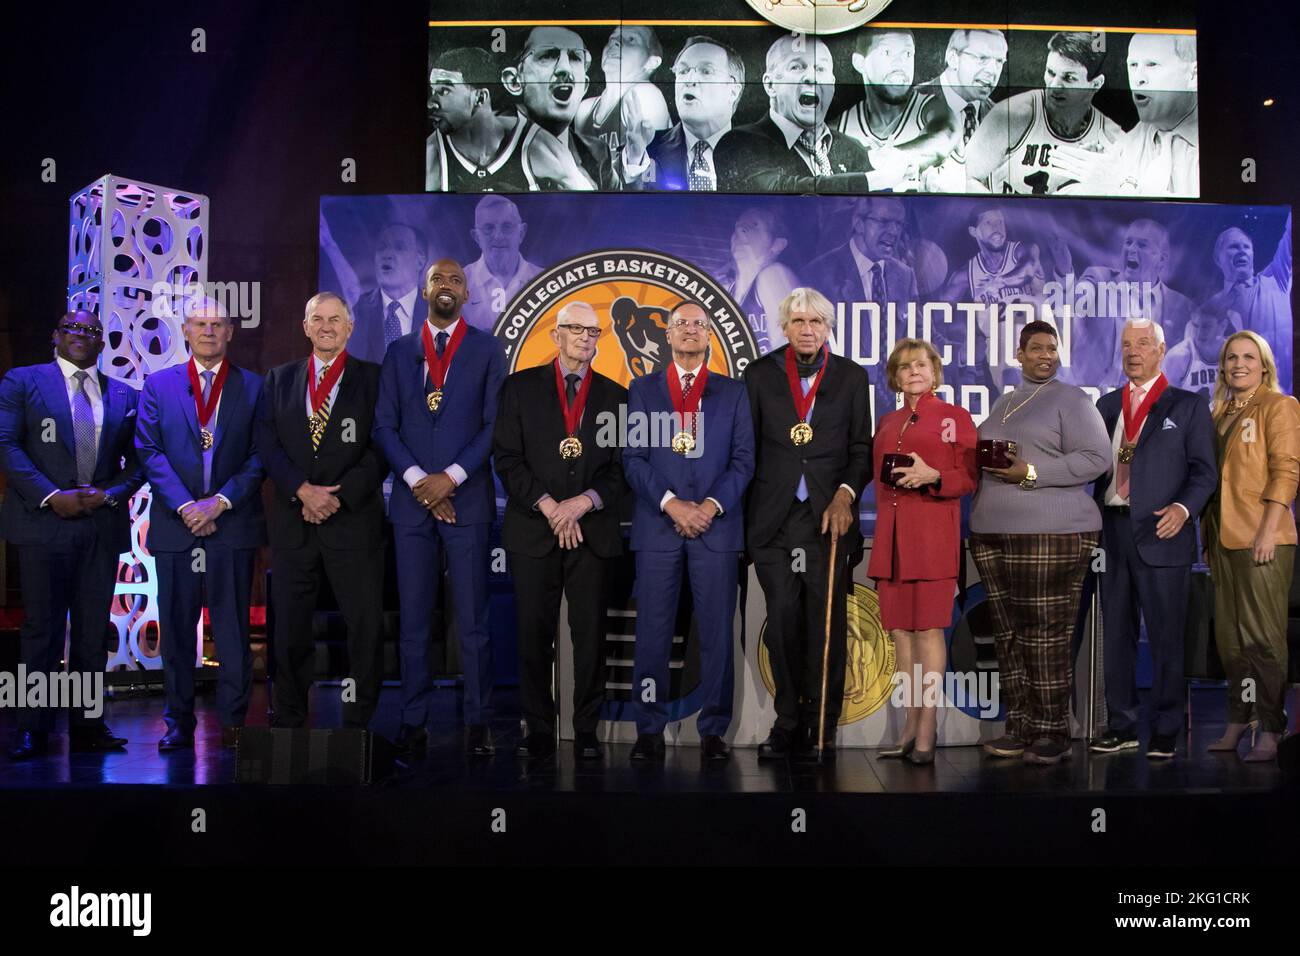 Kansas City, Missouri, USA. 20th Nov, 2022. Pictured are the final awards given at the 2022 Collegiate Basketball Experience - Hall of Fame (CBE-HOF) Induction Celebration held at T-Mobile Center, Kansas City, on November 20, 2022. From l-r are Master of Ceremonies Chris Walker of CBS Sports, Coach John Beilein, Coach Jim Calhoun, guard/forward Richard Hamilton, Coach Jerry Krause, Coach Lon Kruger; guard/forward Larry Miller, Barbara Selvy (wife of guard/forward Frank Selvy), Sonia Harrison (daughter of guard Jimmy Walker), Coach Roy Williams, and Master of Ceremonies Lisa Byington of Ball Stock Photo